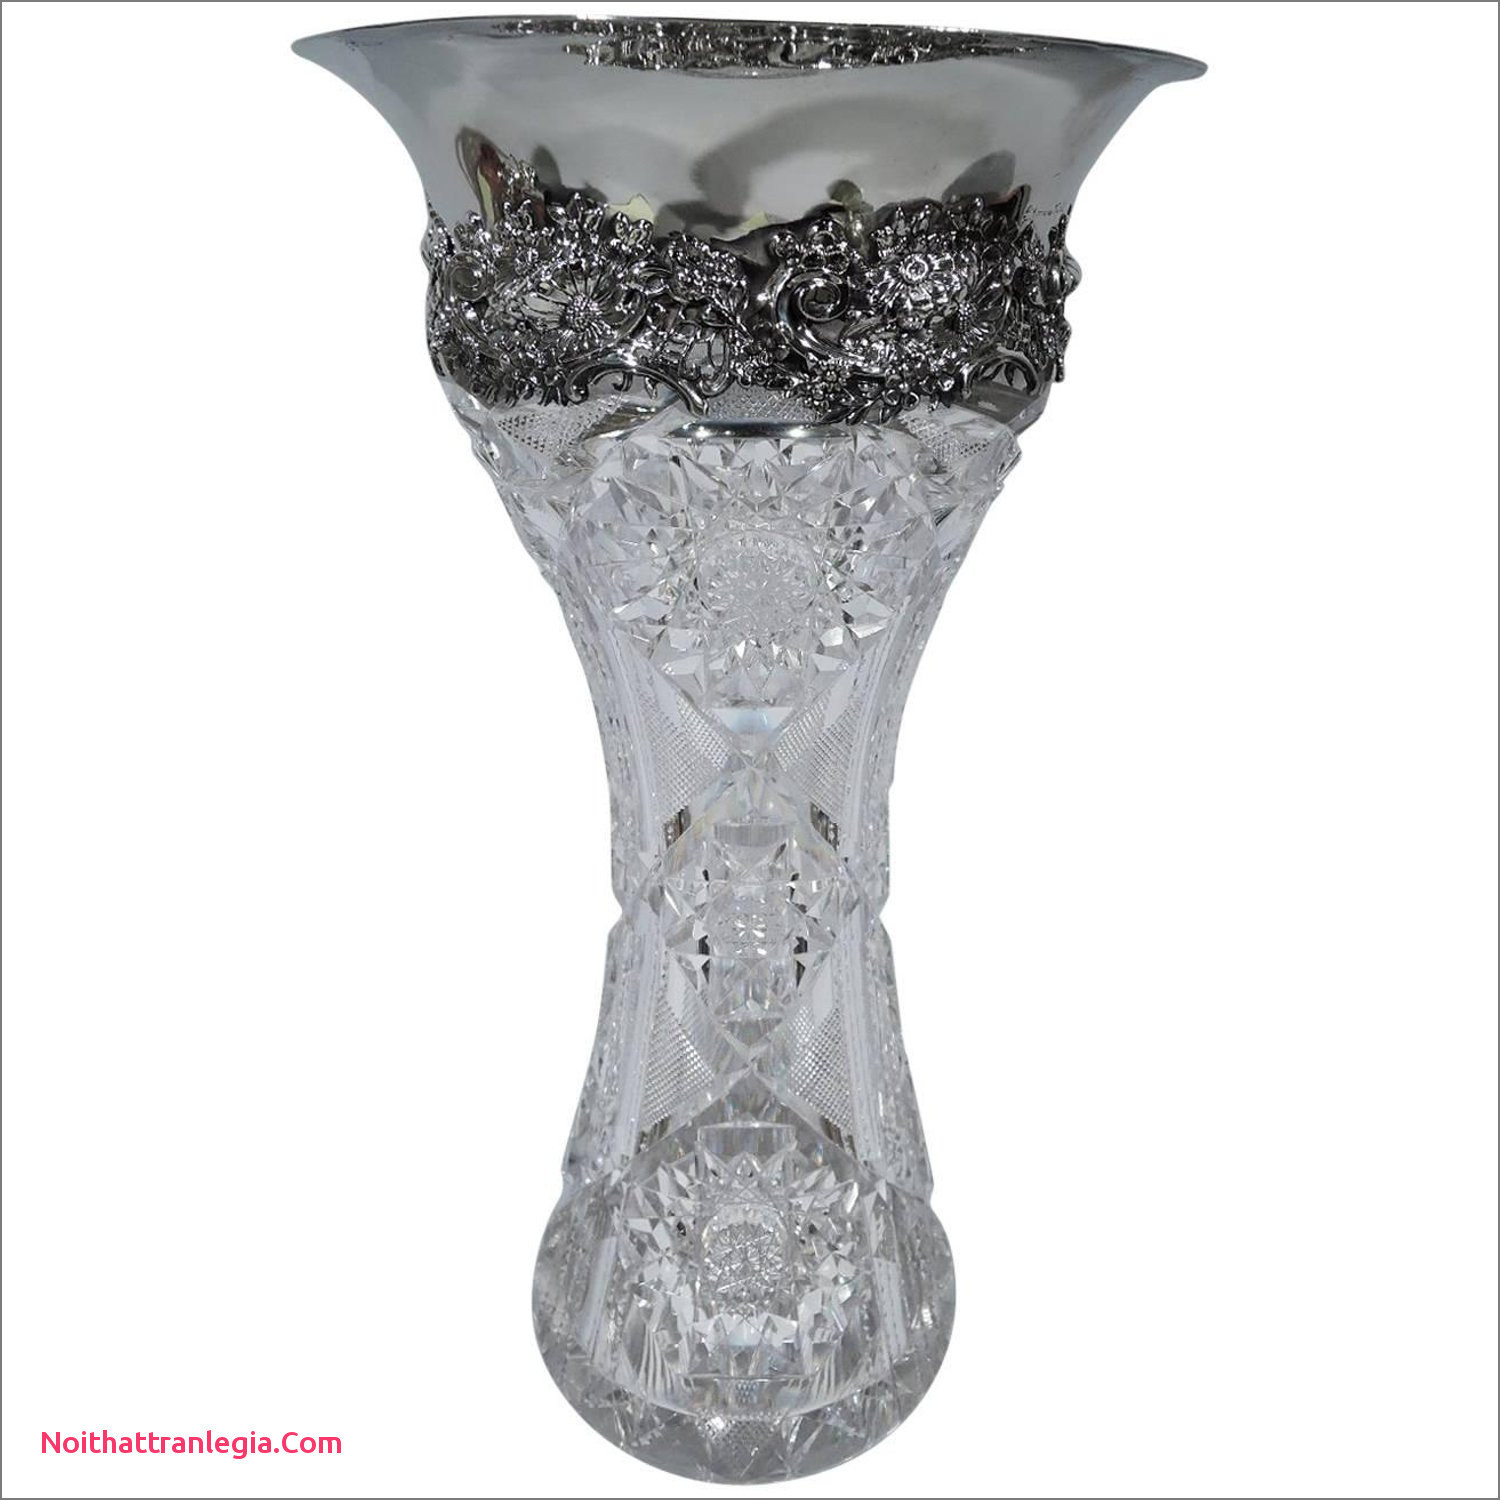 fish design vase of 20 cut glass antique vase noithattranlegia vases design pertaining to antique brilliant cut glass and sterling silver vase by redlich for sale at 1stdibs